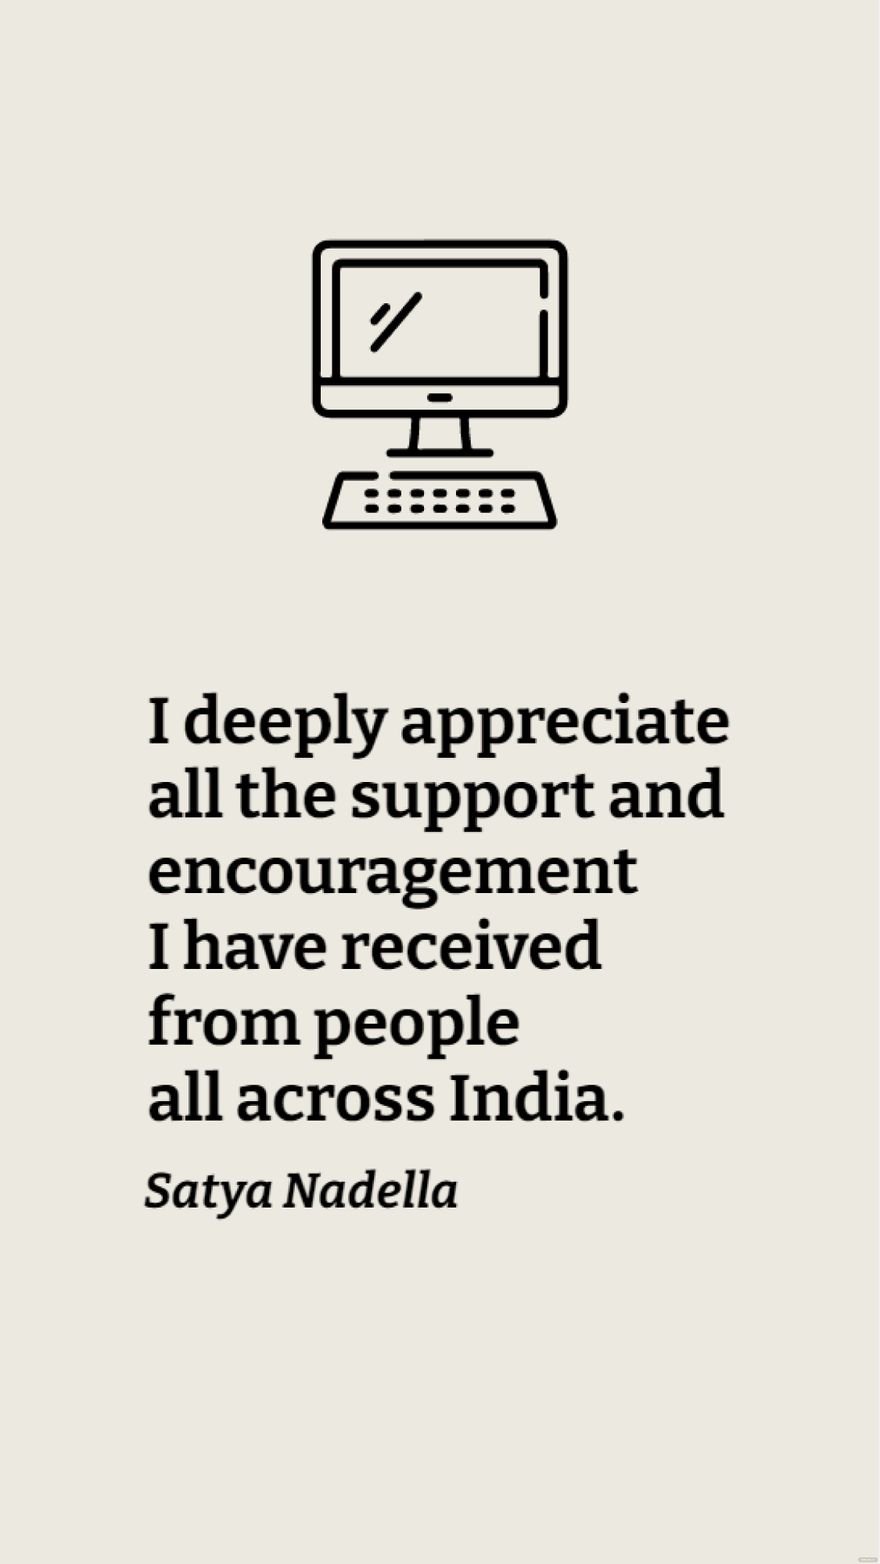 Satya Nadella - I deeply appreciate all the support and encouragement I have received from people all across India.